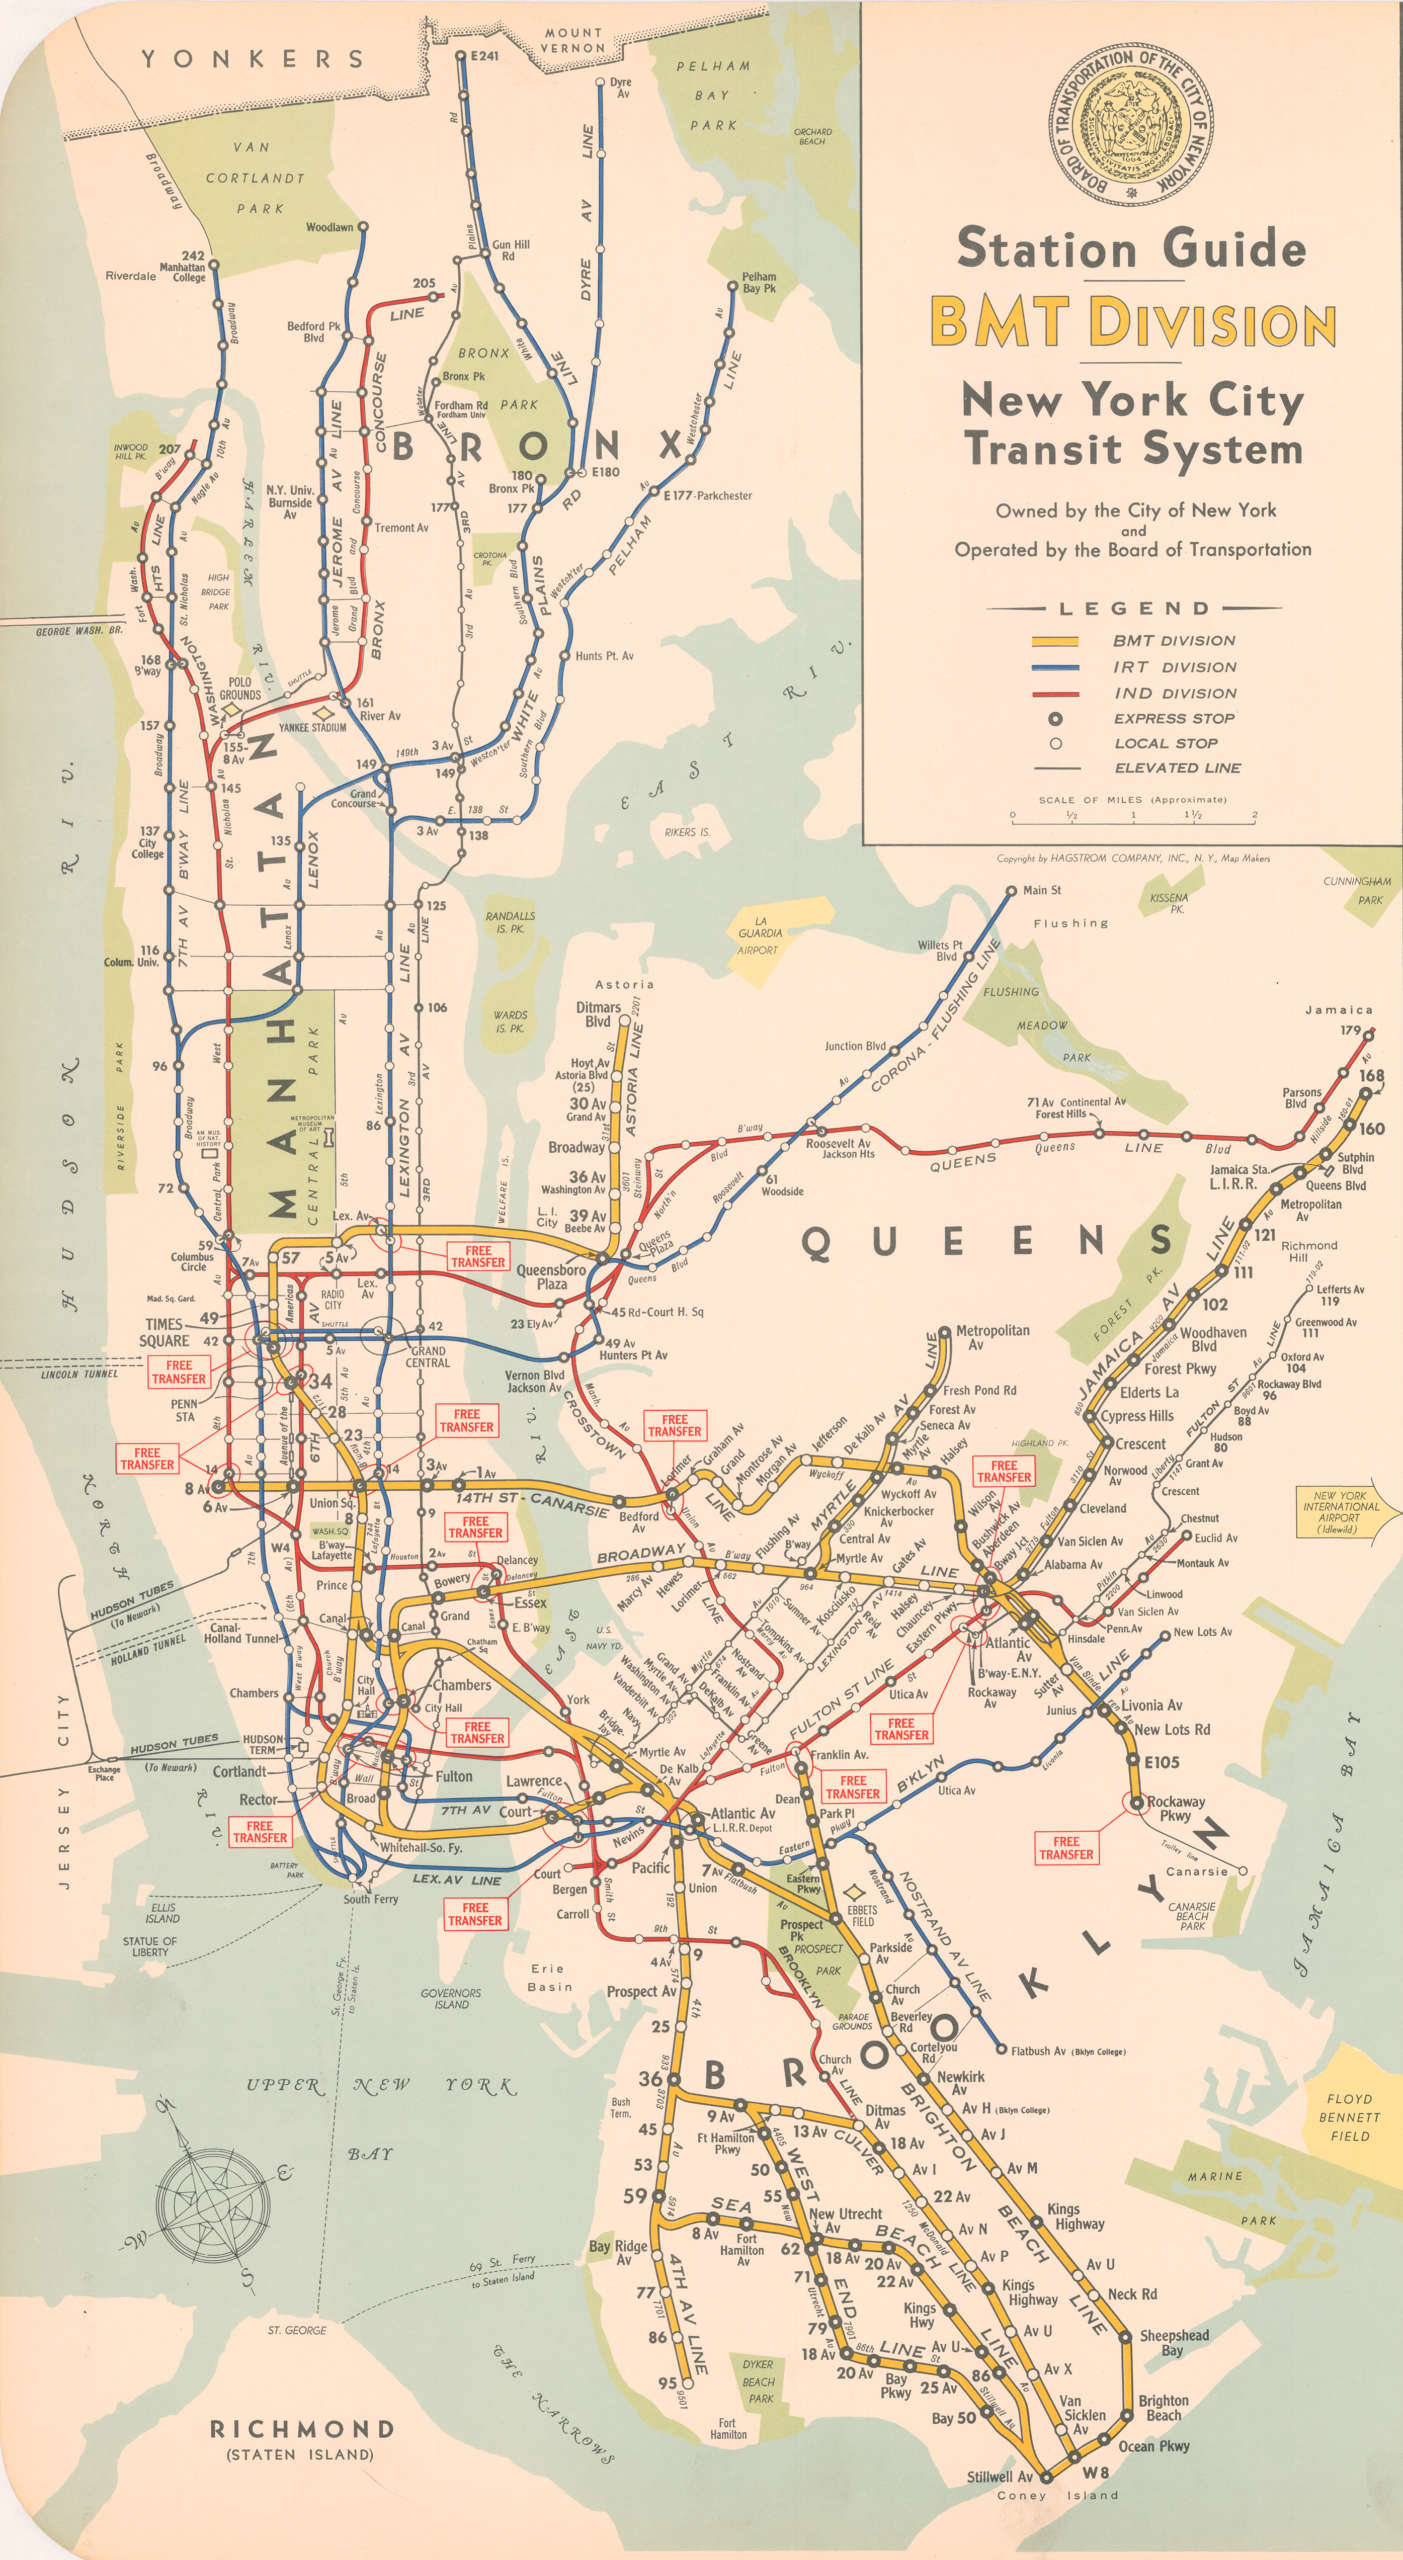 Station Guides, 1948, XX.2014.6.10; New York Transit Museum Collection.